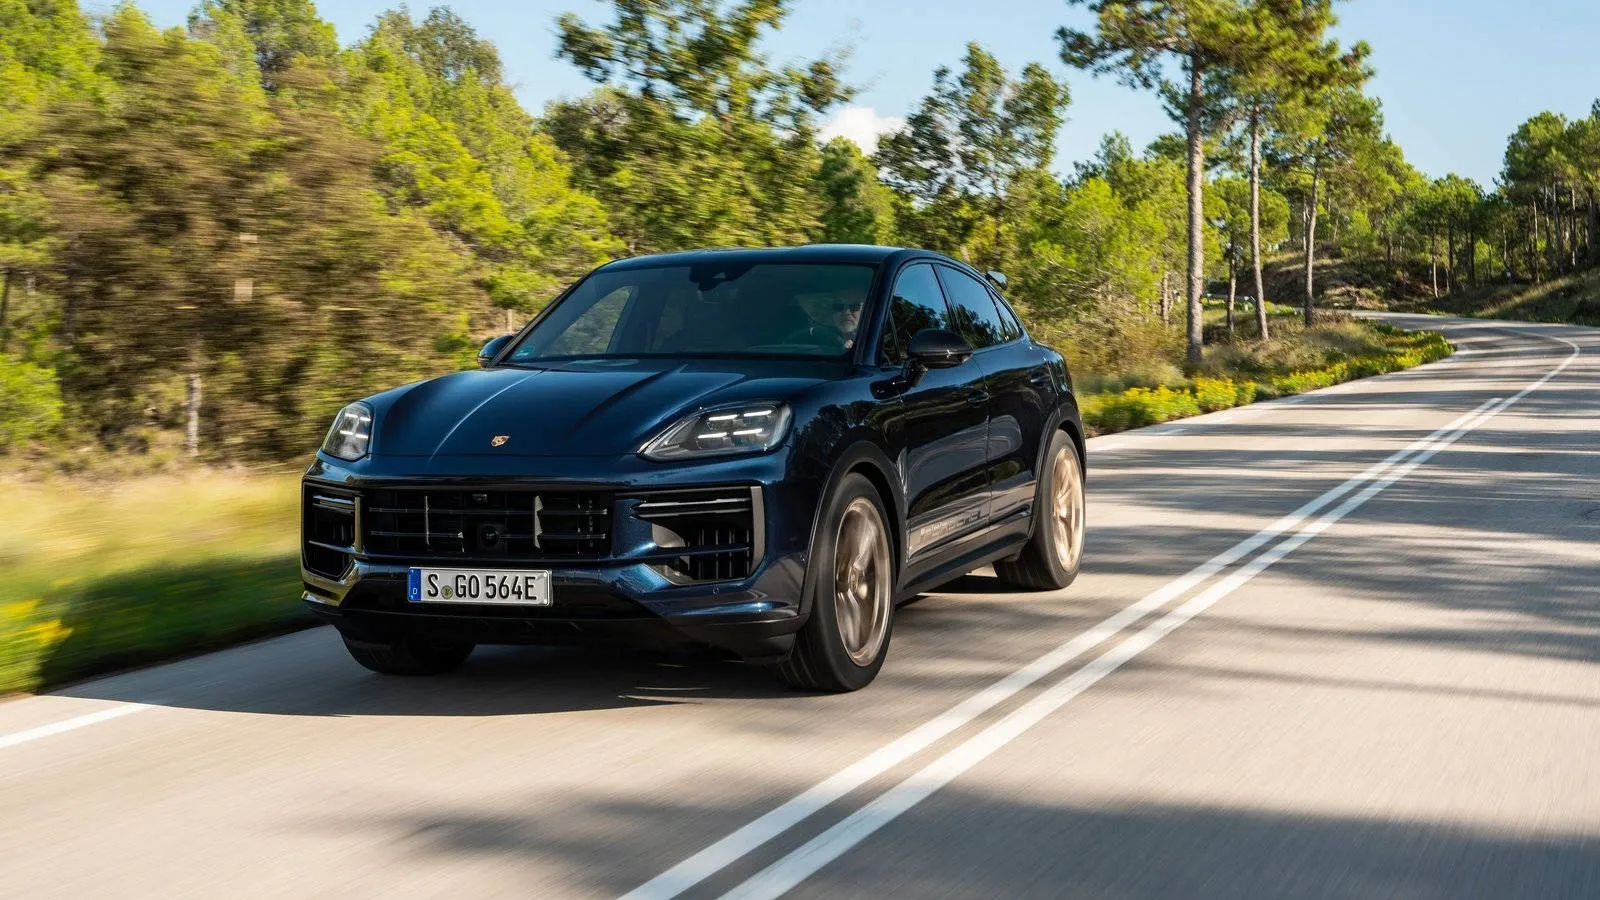 Porsche Cayenne Review — The Definitive Sports Utility Vehicle